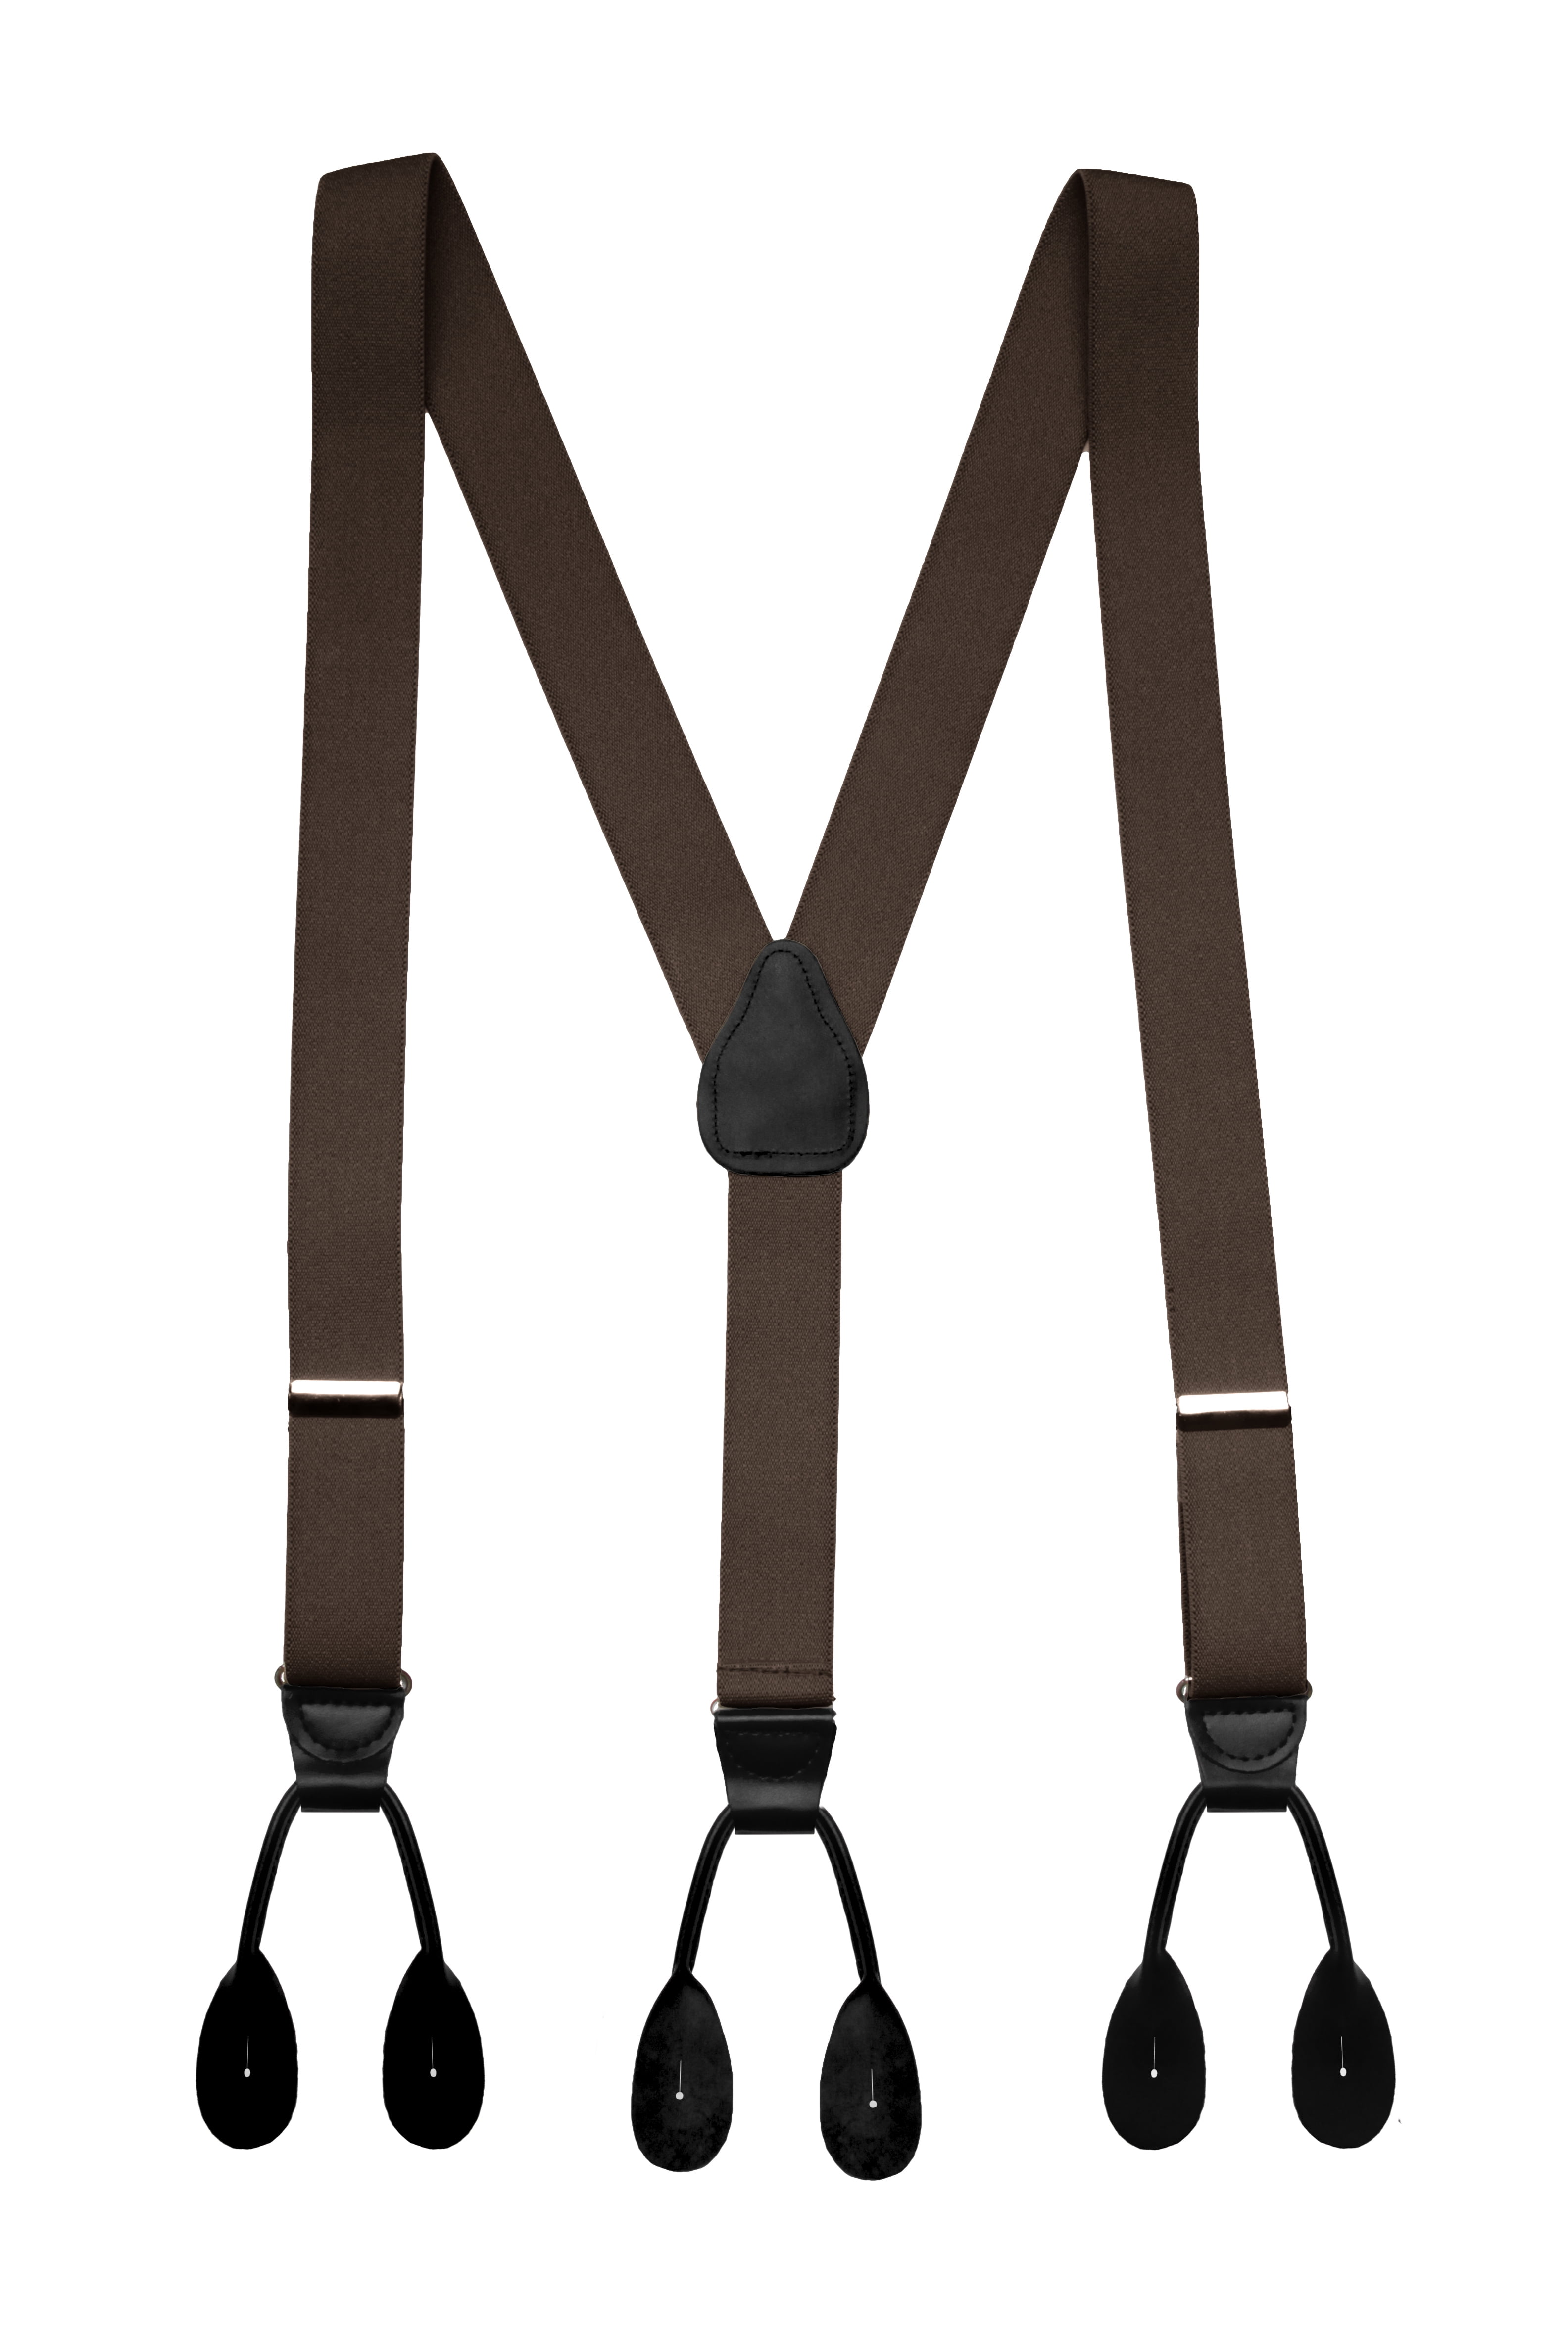 Y back with Leather Button End and Strap Mens Elastic Adjustable Braces Suspenders 